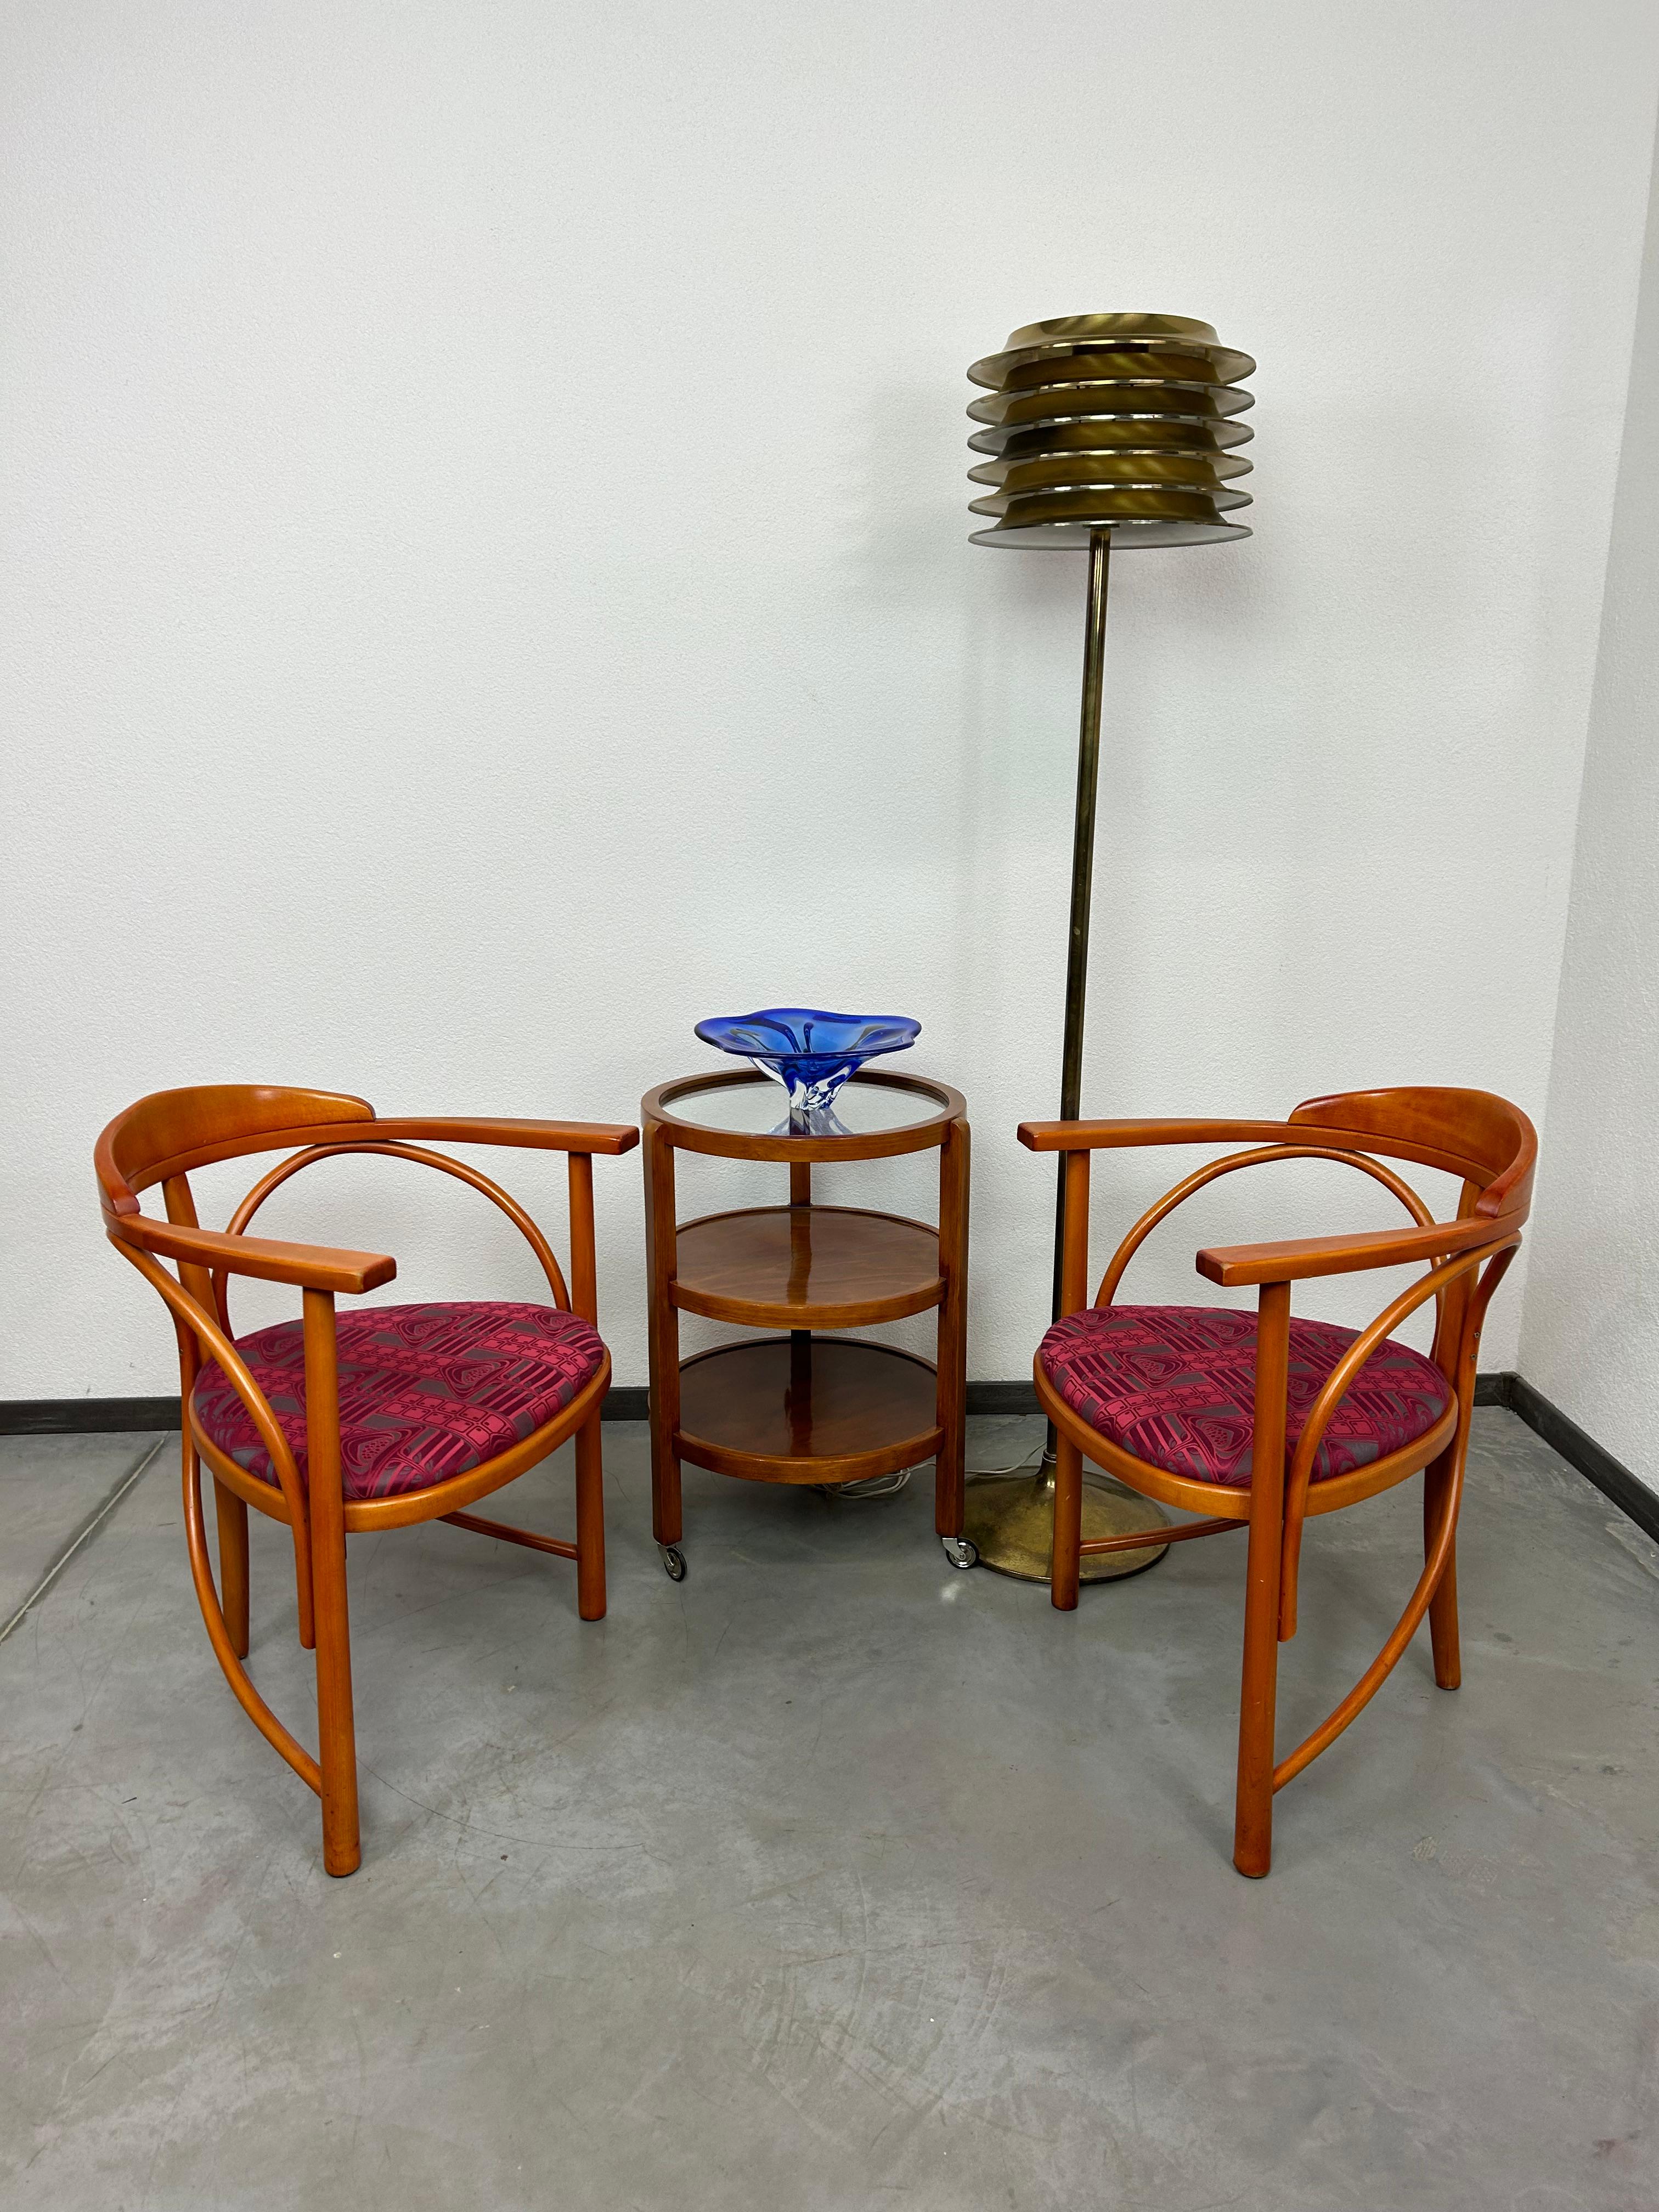 Secession tripod chairs no.81 by Thonet with new secession fabric.